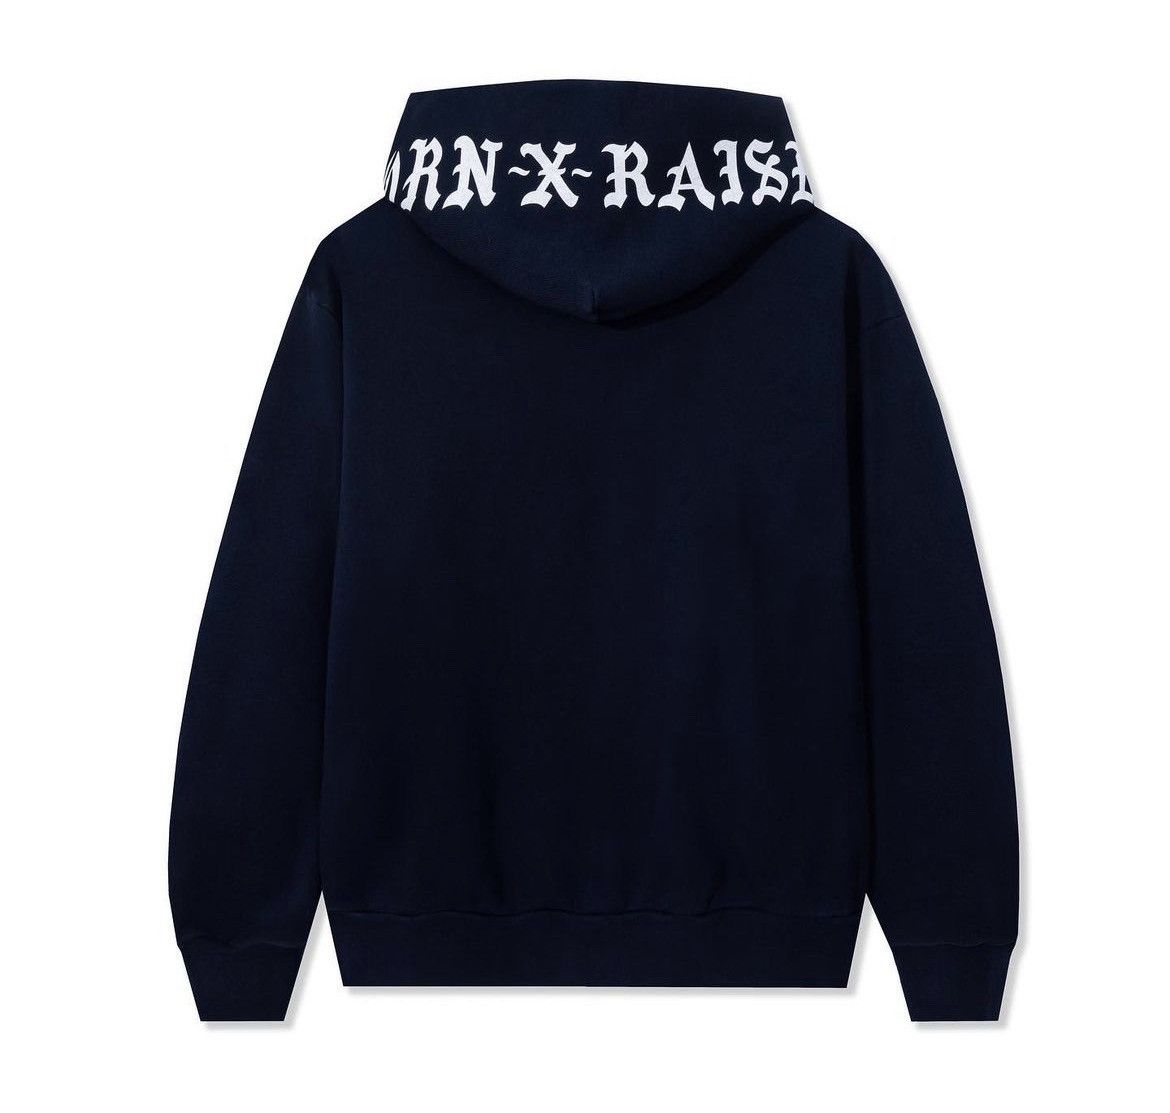 Japanese Brand Born X Raised & Wasted Youth (Verdy) Embroidered 